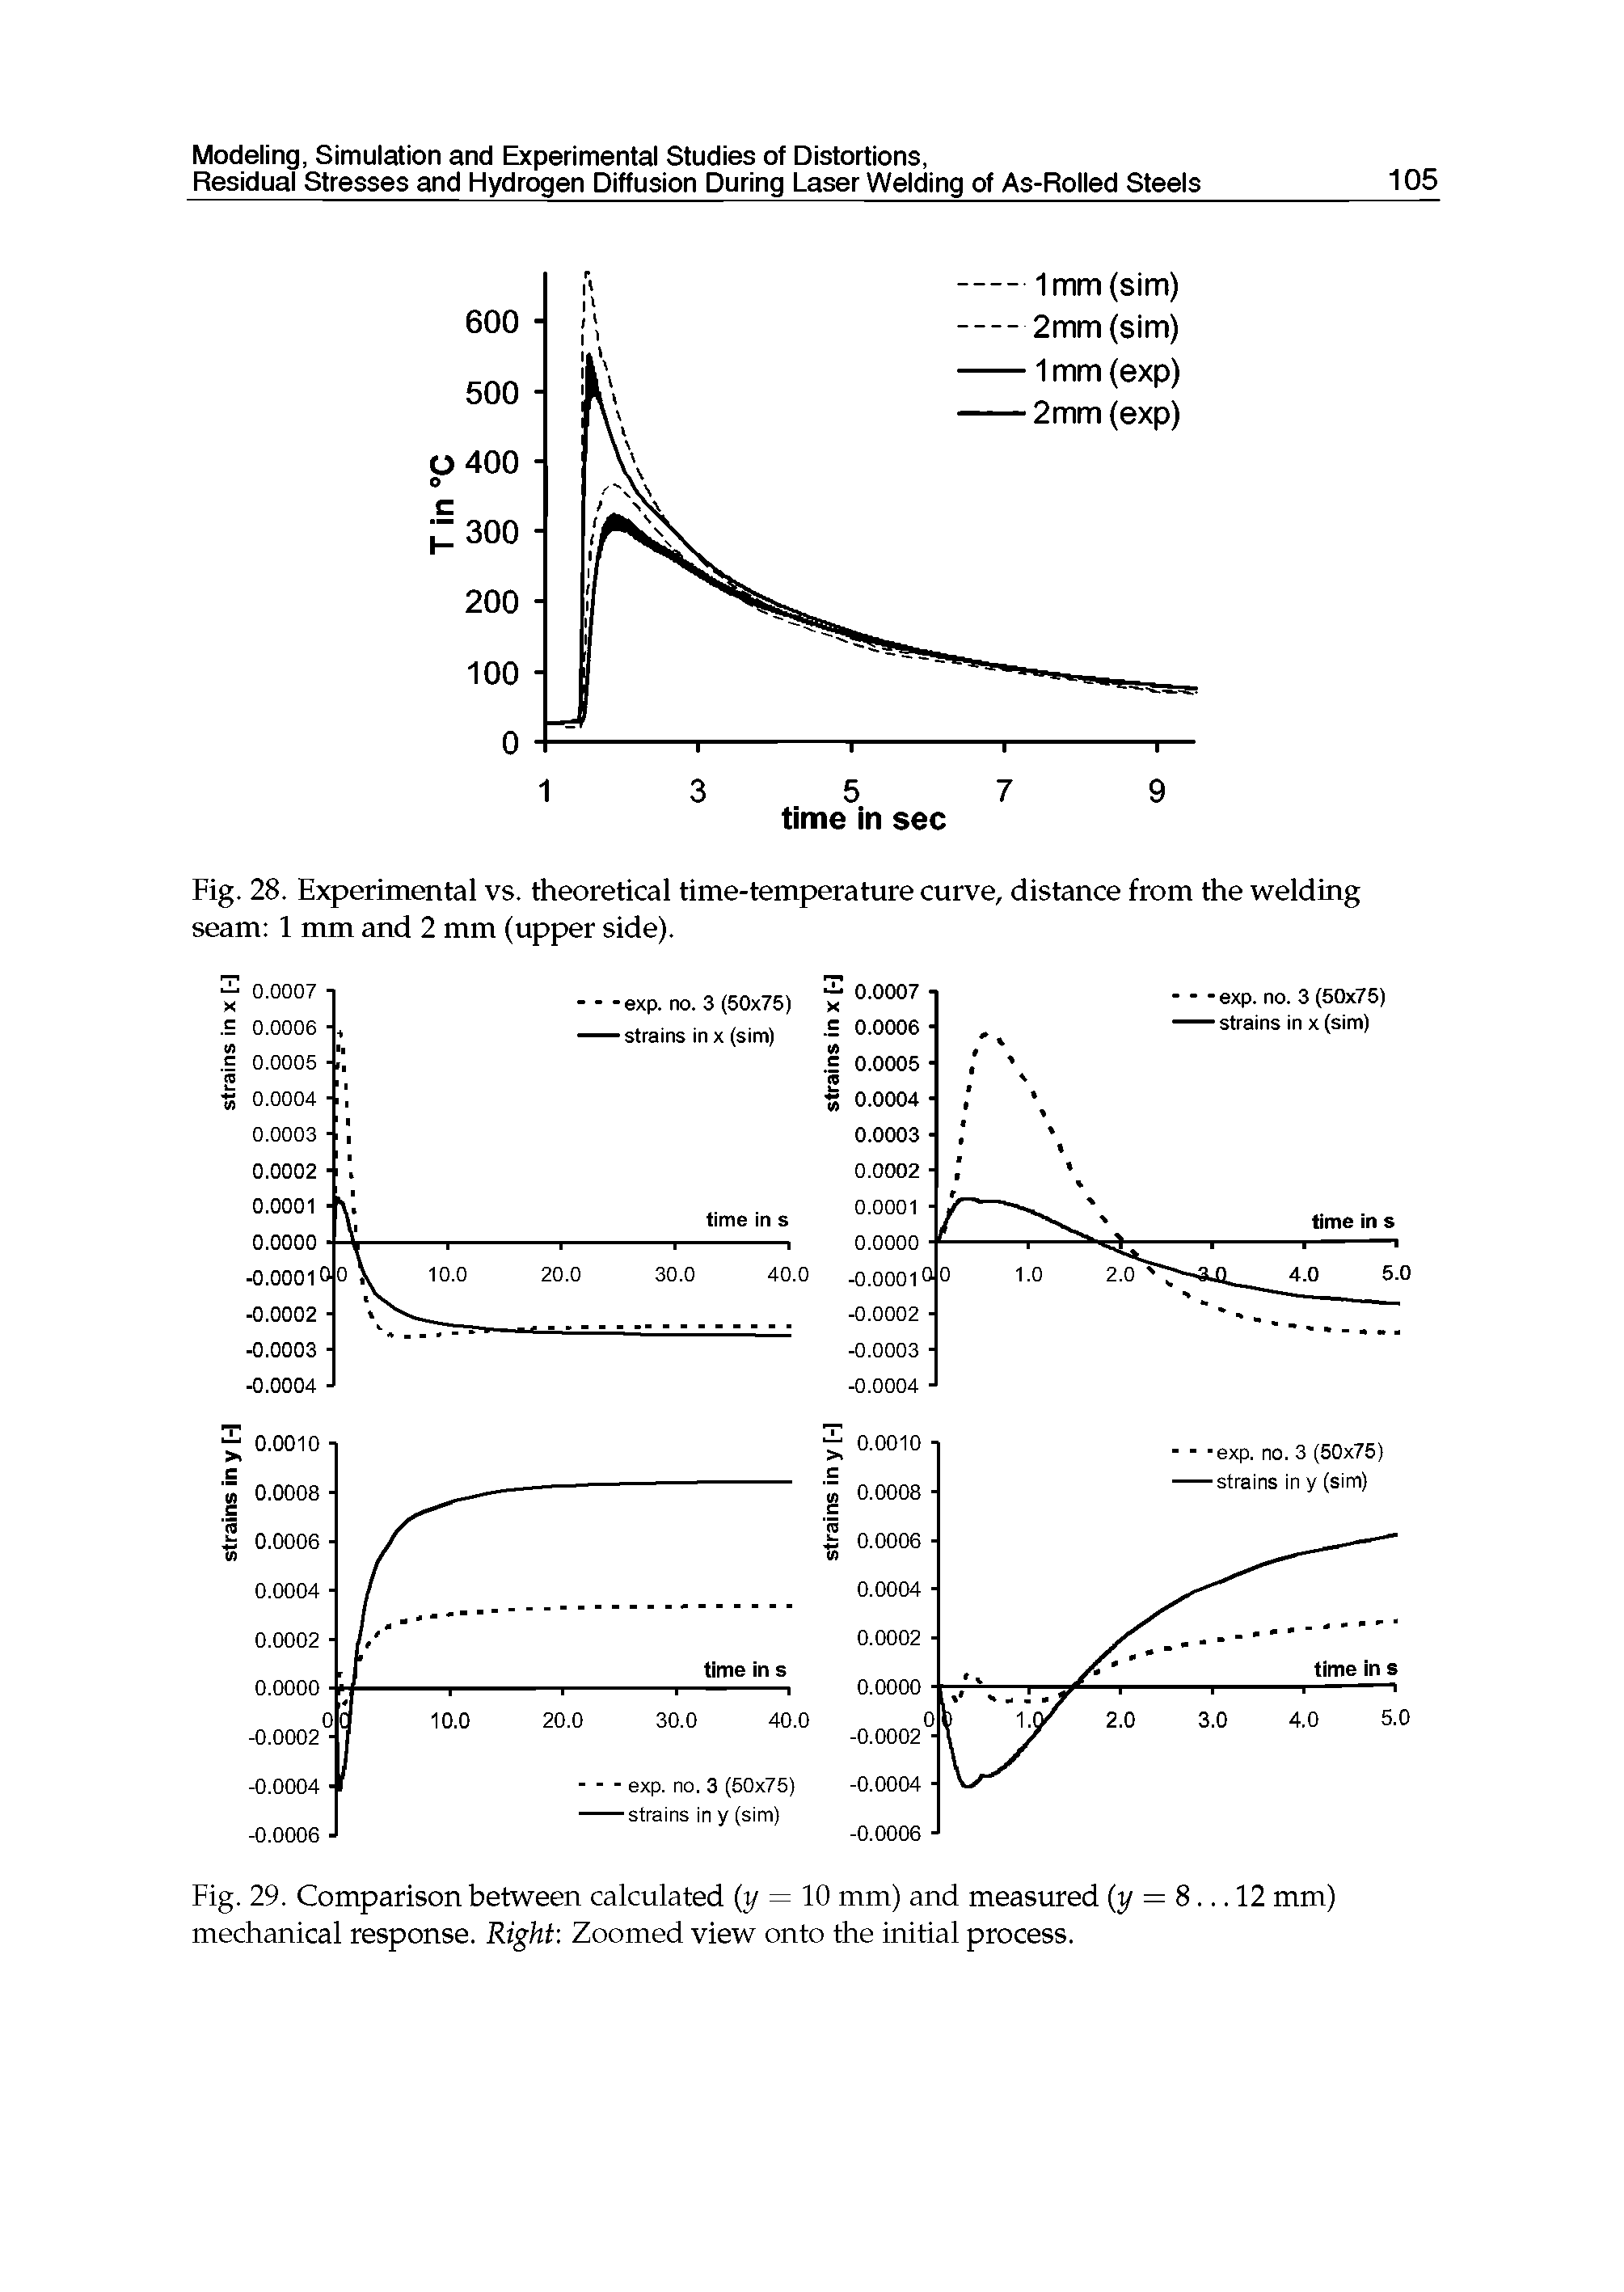 Fig. 28. Experimental vs. theoretical time-temperature curve, distance from the welding seam 1 mm and 2 mm (upper side).